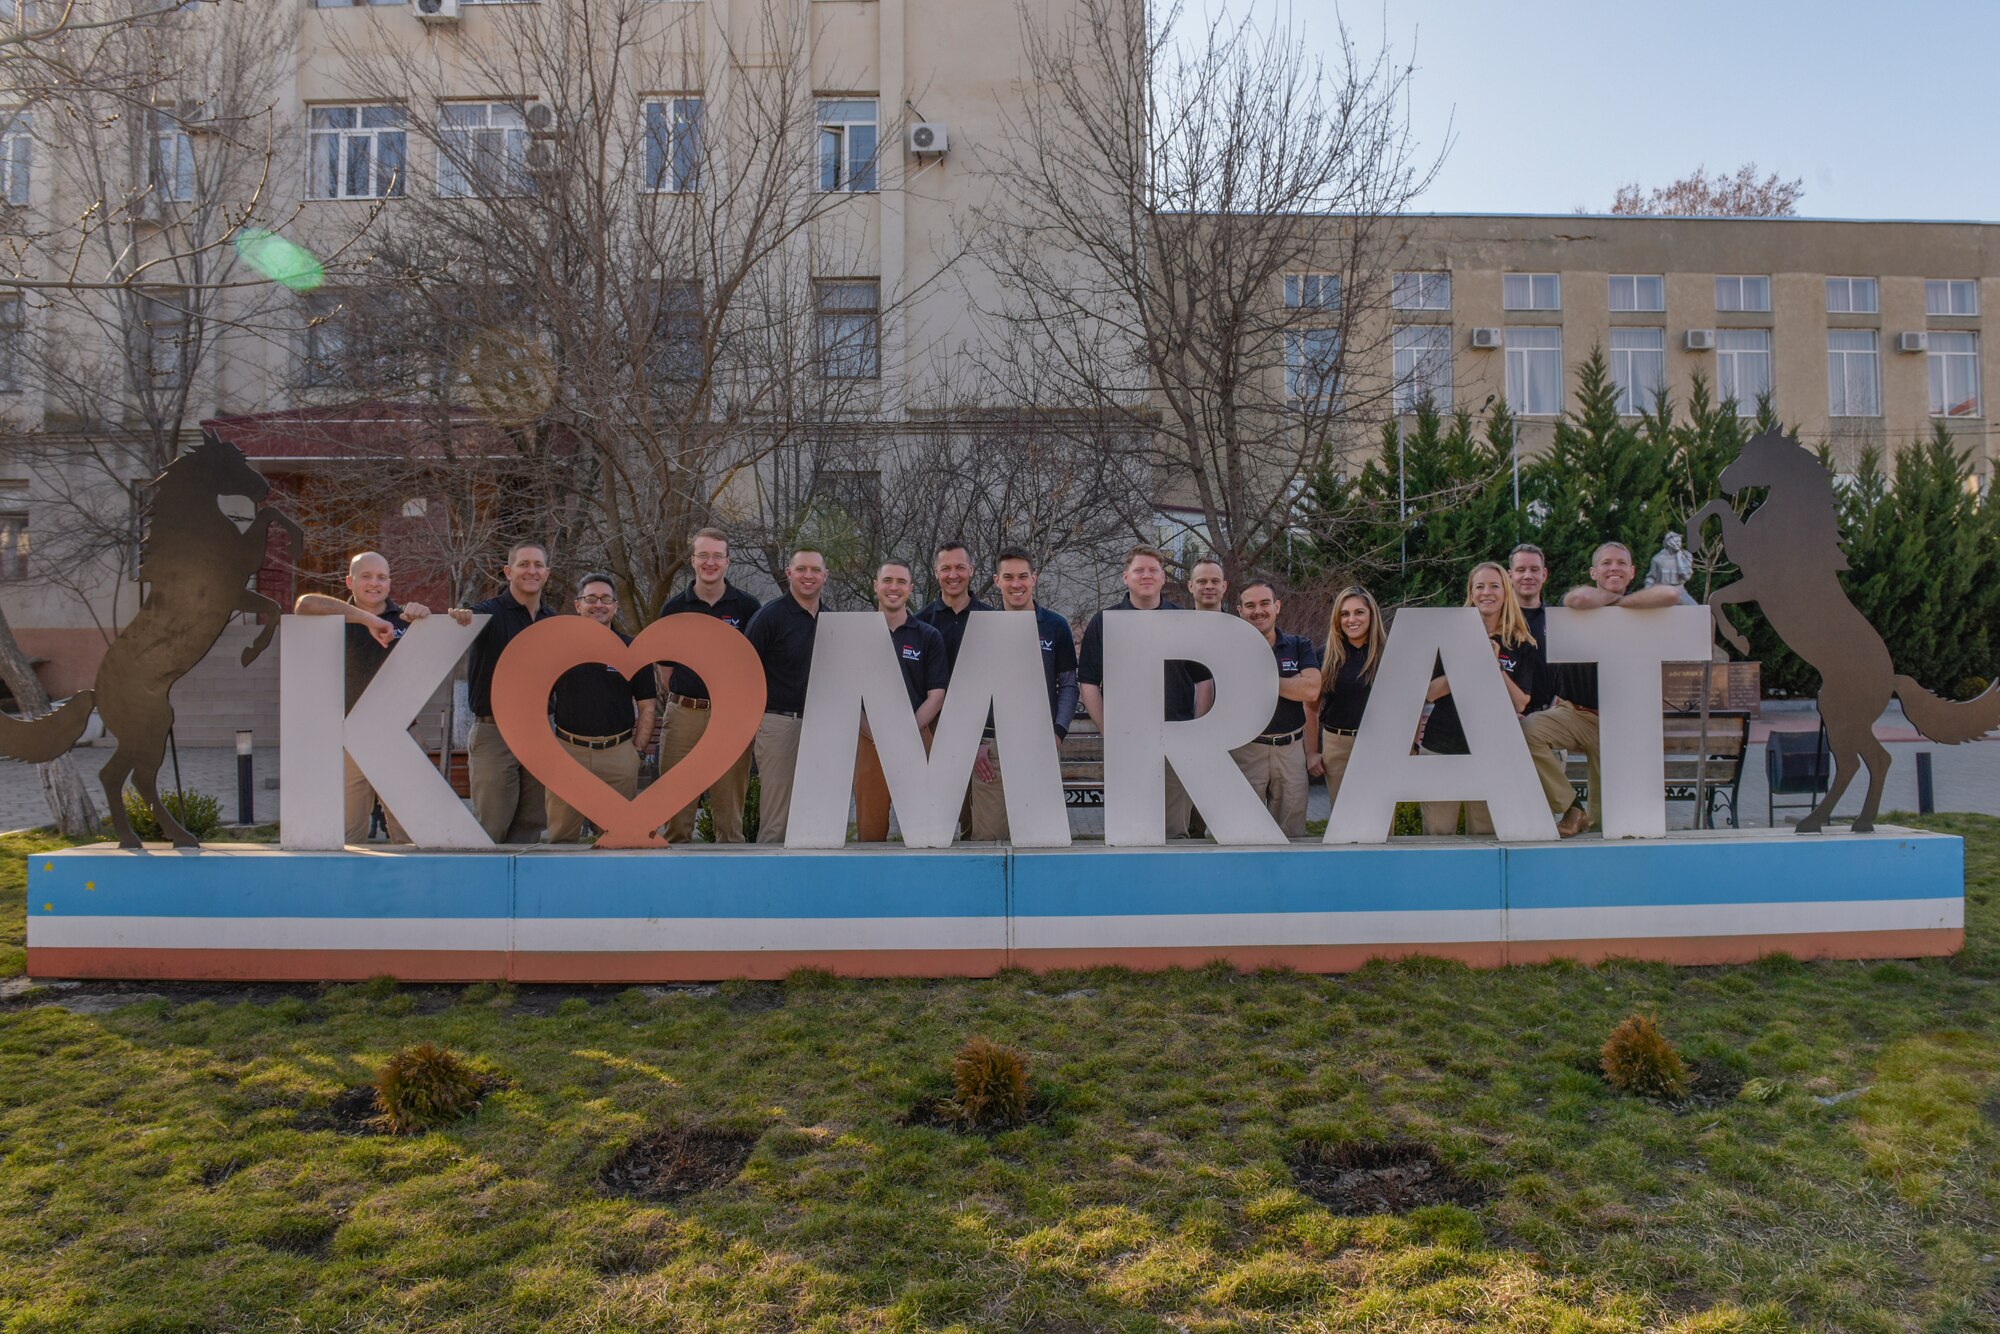 People stand behind a sign that says "Komrat"